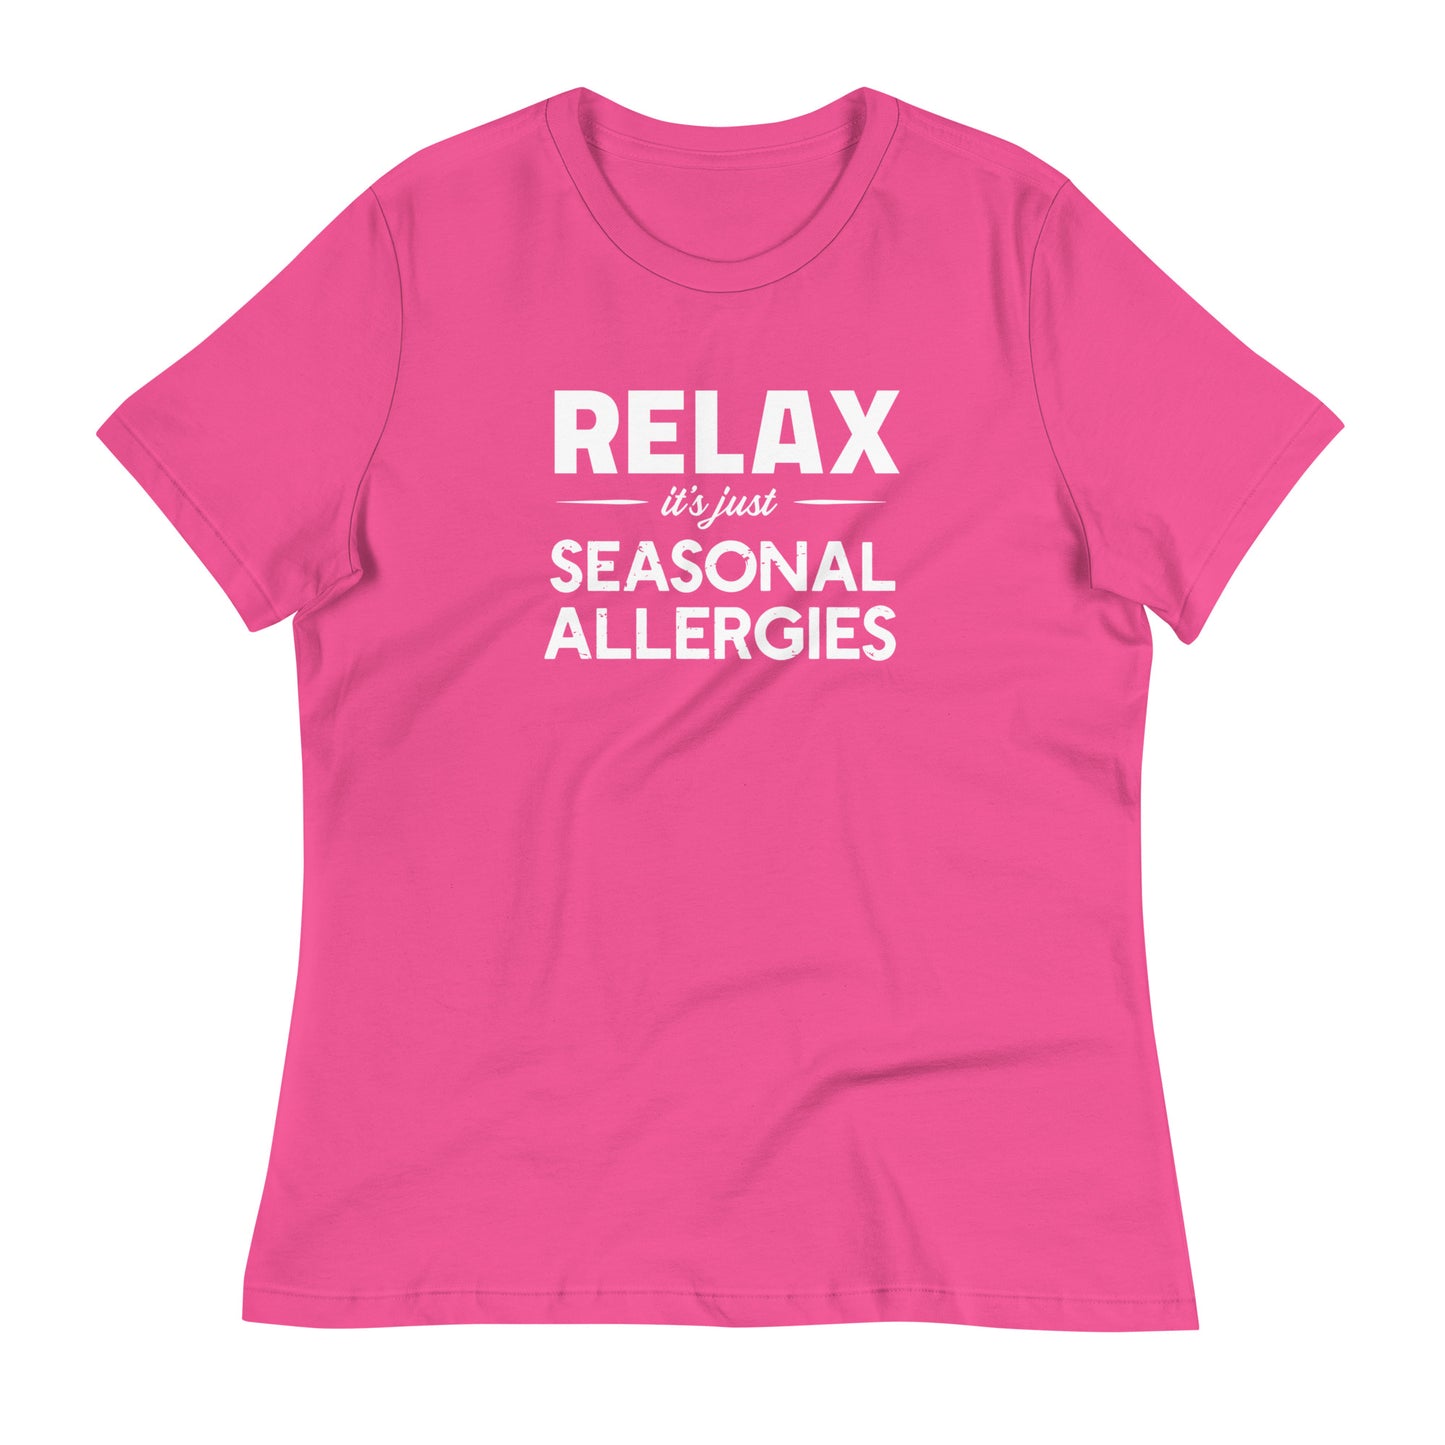 Berry (hot pink) women's relaxed fit t-shirt with white graphic: "RELAX it's just SEASONAL ALLERGIES"